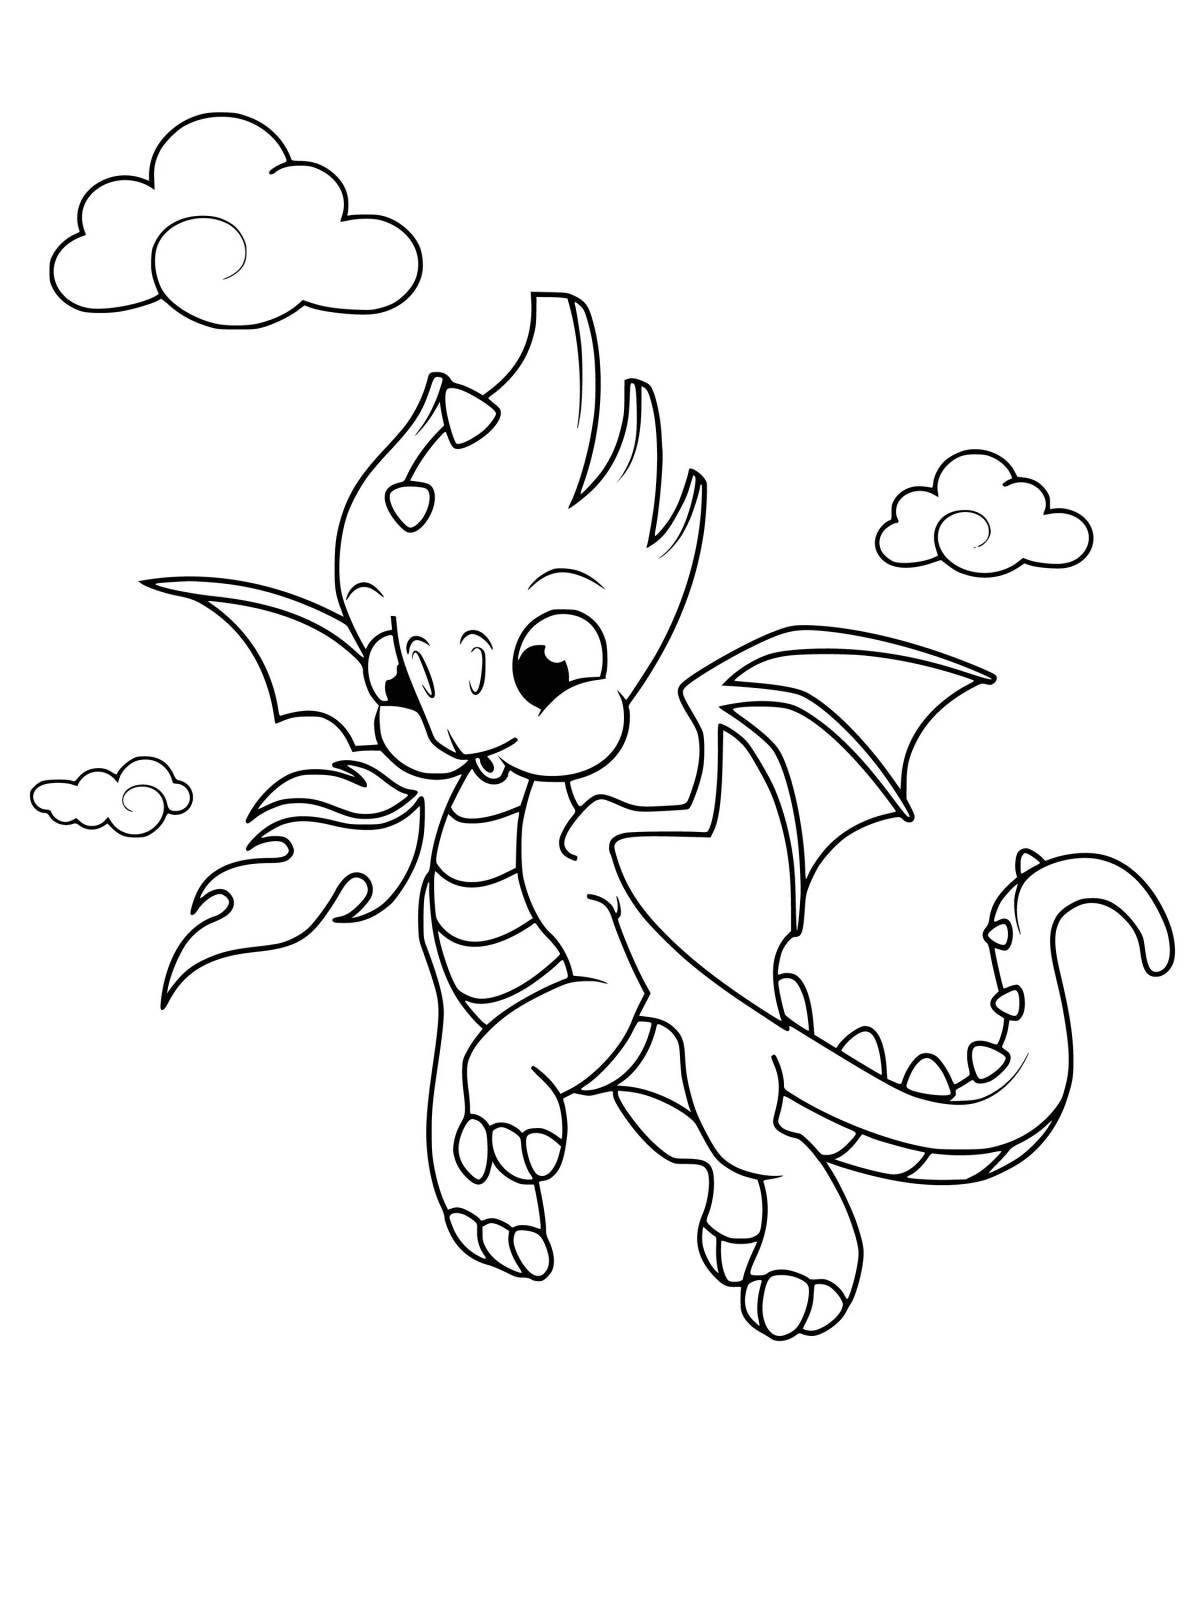 Dramatic coloring dragons for children 4-5 years old